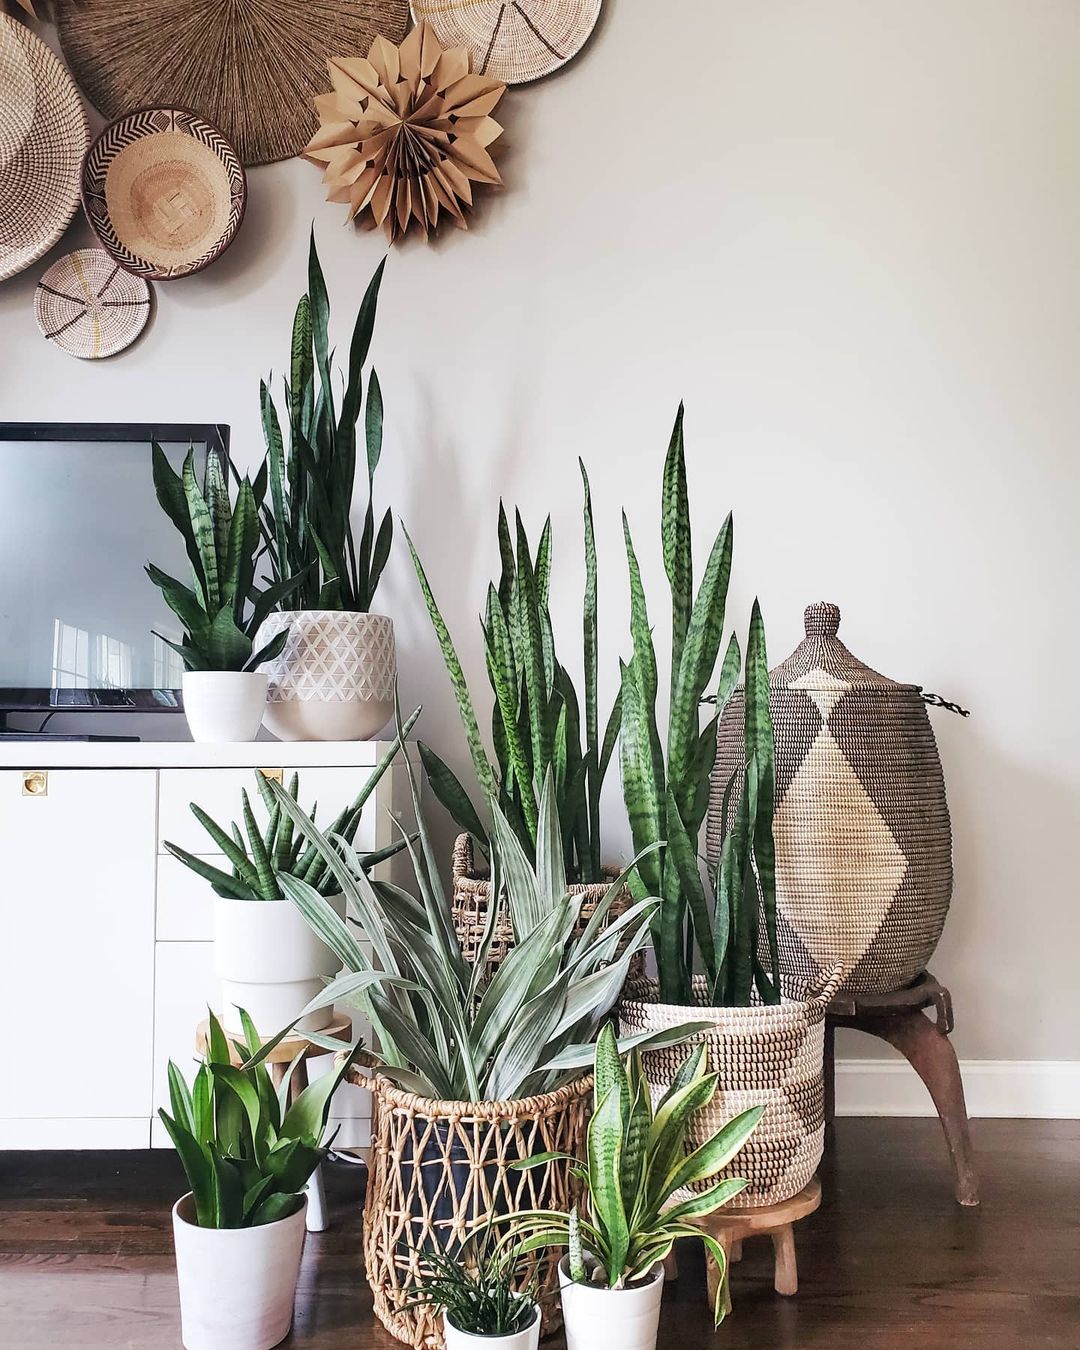 https://www.extraspace.com/blog/wp-content/uploads/2021/07/Guide-to-houseplants-find-air-purifying-plants.jpeg